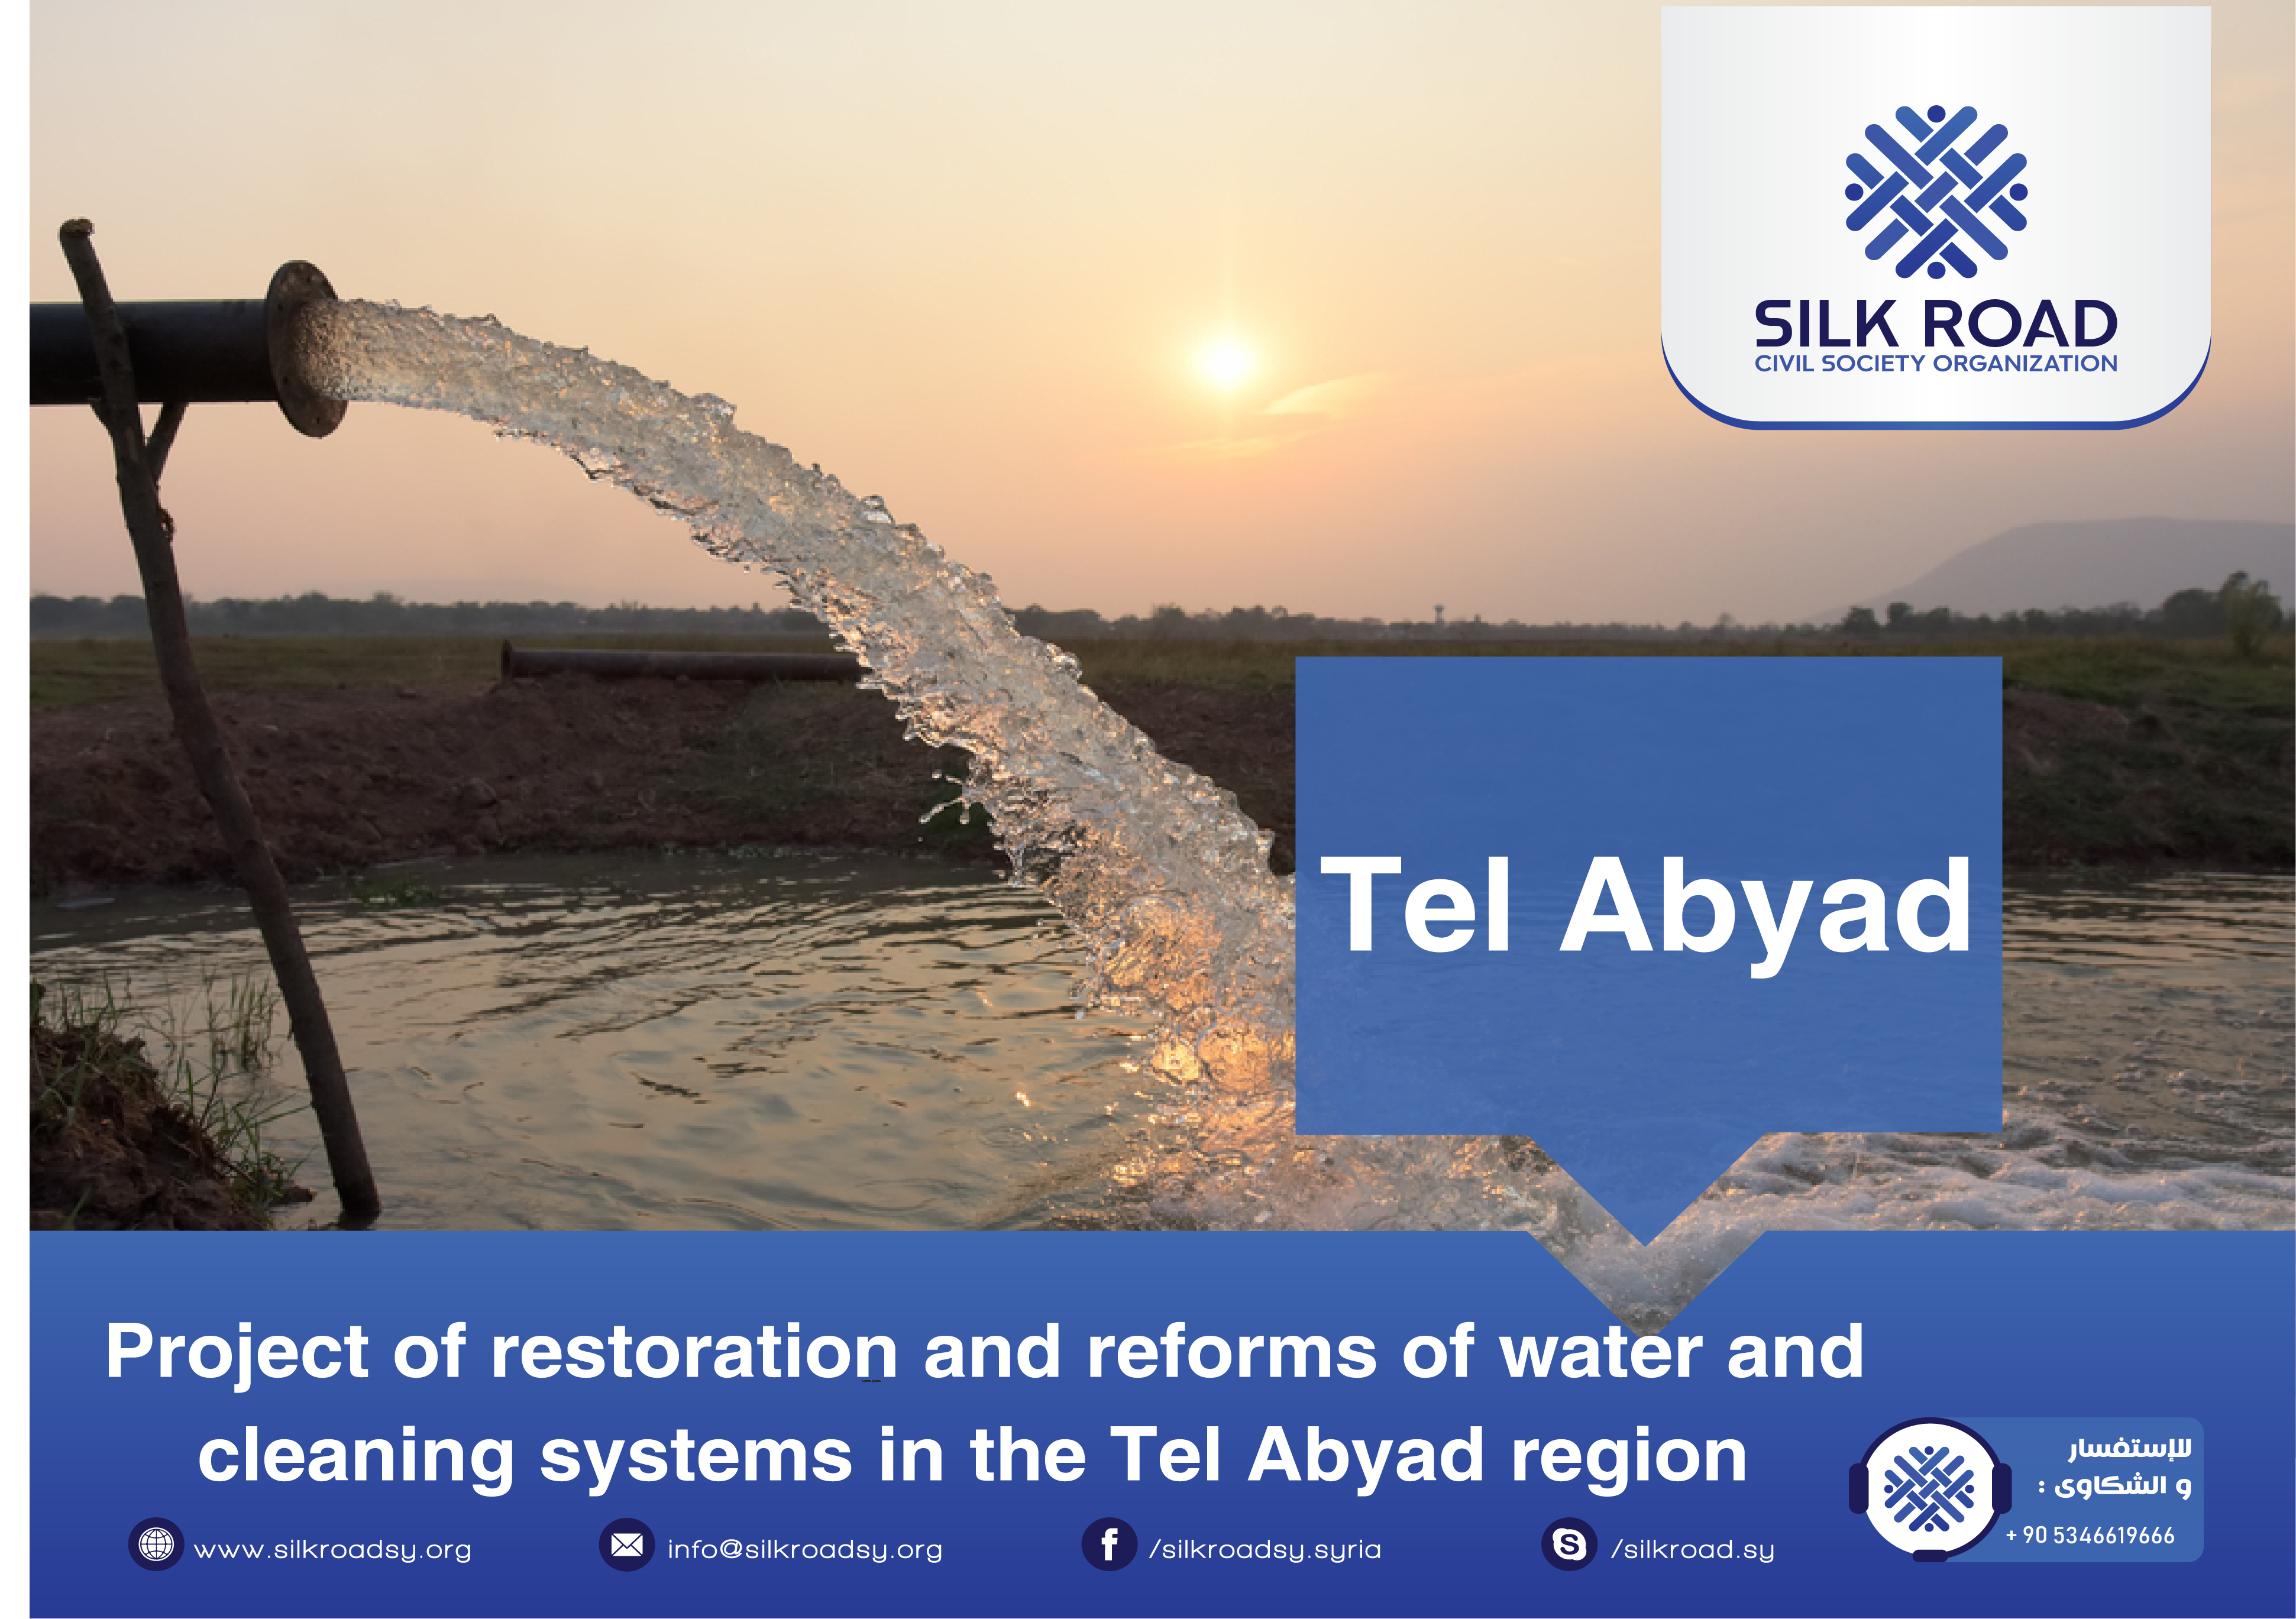 Project of restoration and reforms of water and cleaning systems in the Tel Abyad region